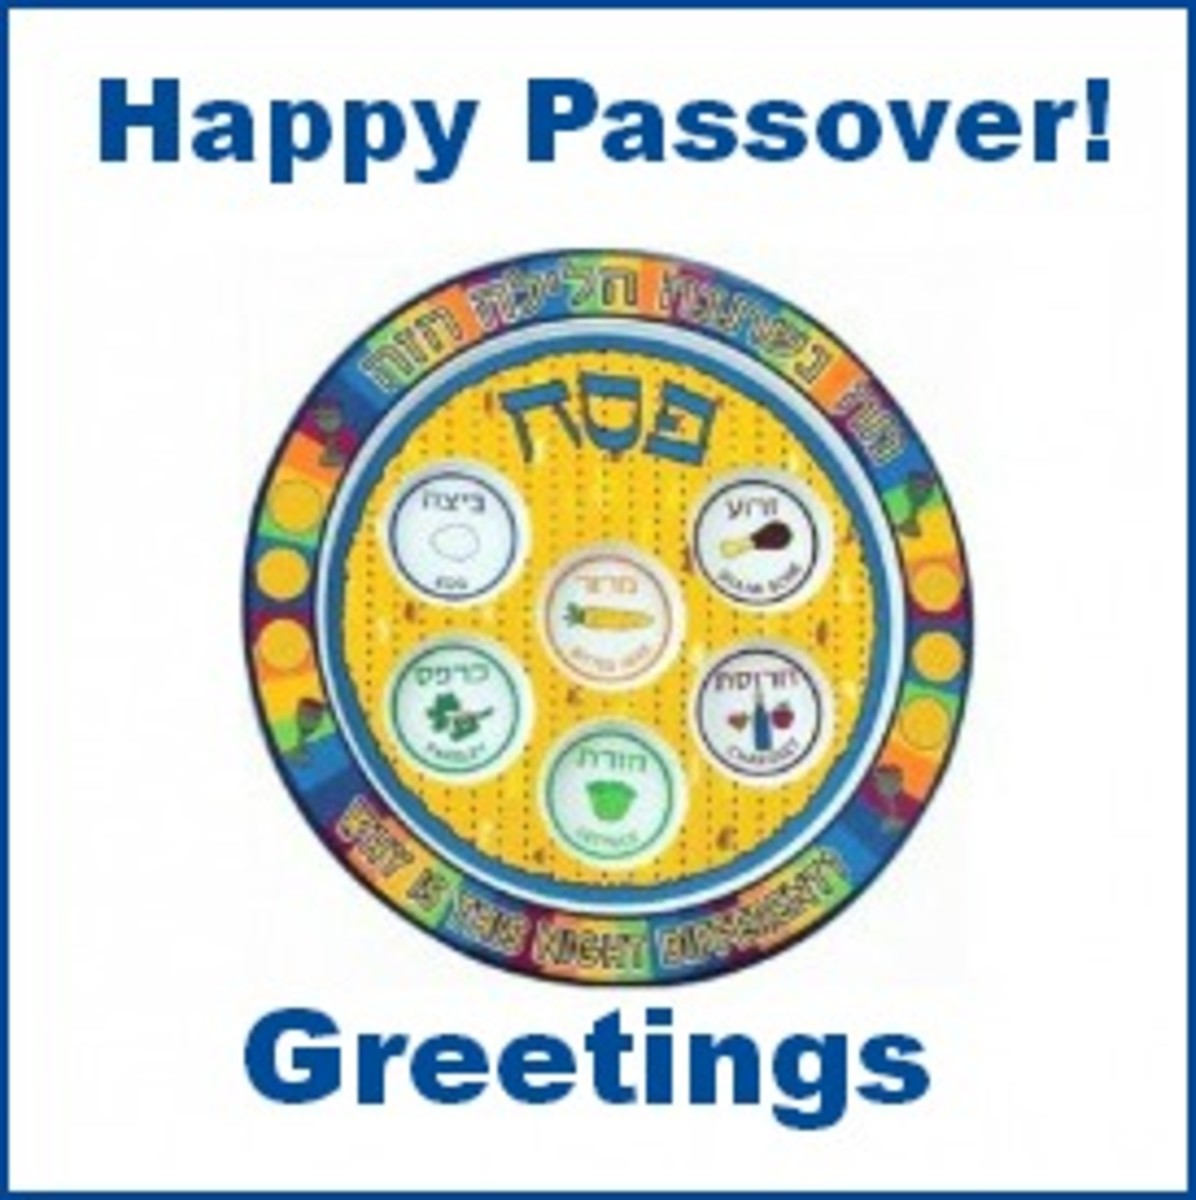 HAPPY PASSOVER! Find a Cool Passover Greeting